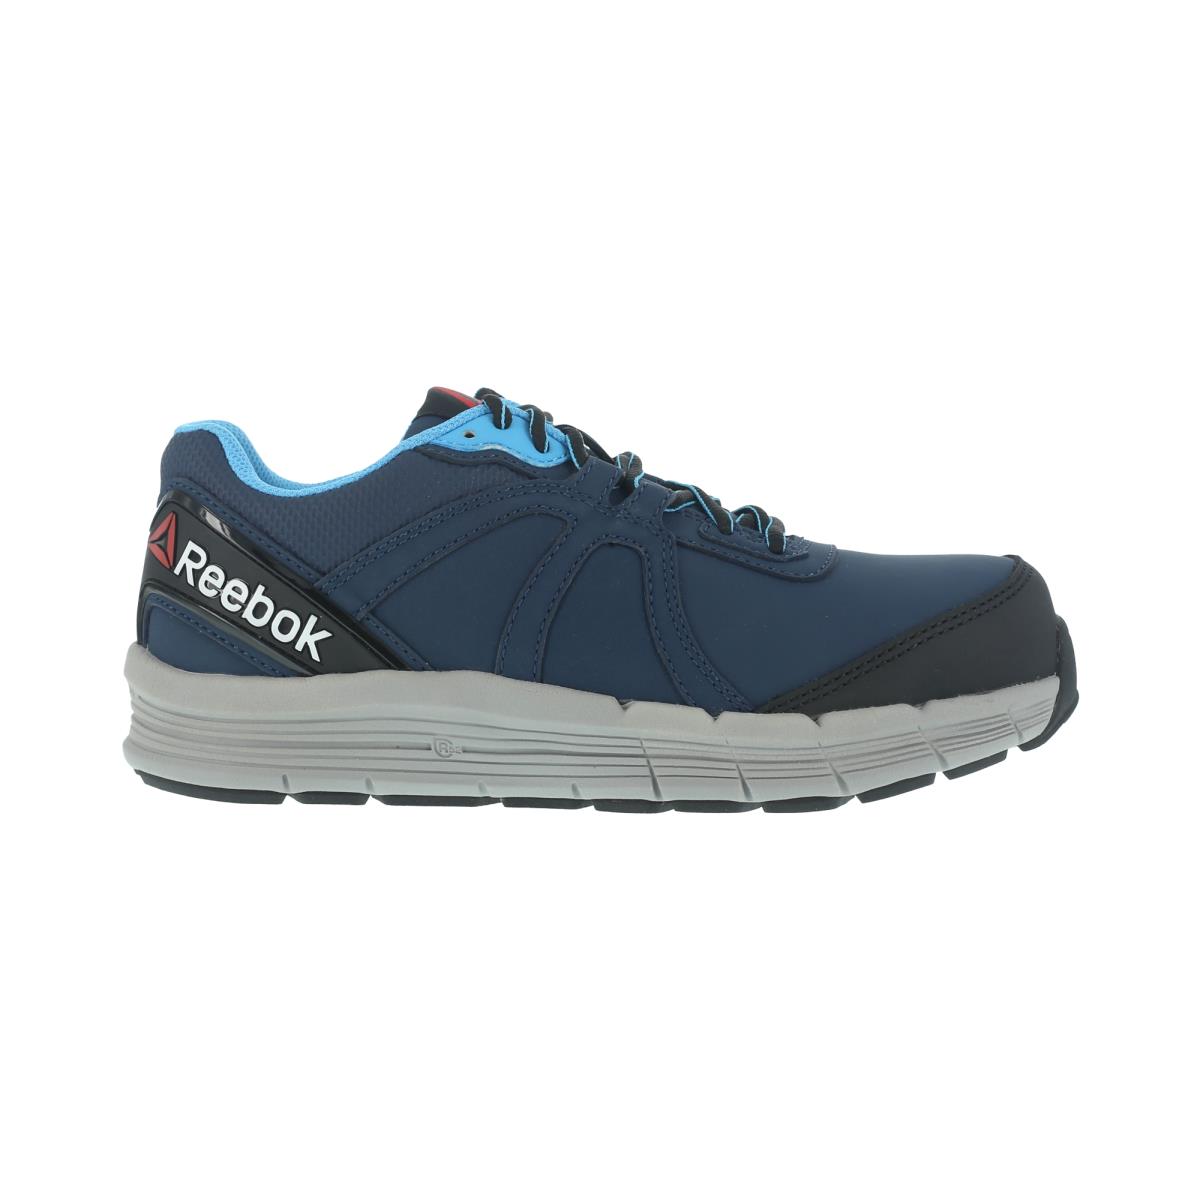 Reebok Womens Blue Leather Work Shoes ST Oxford Guide M